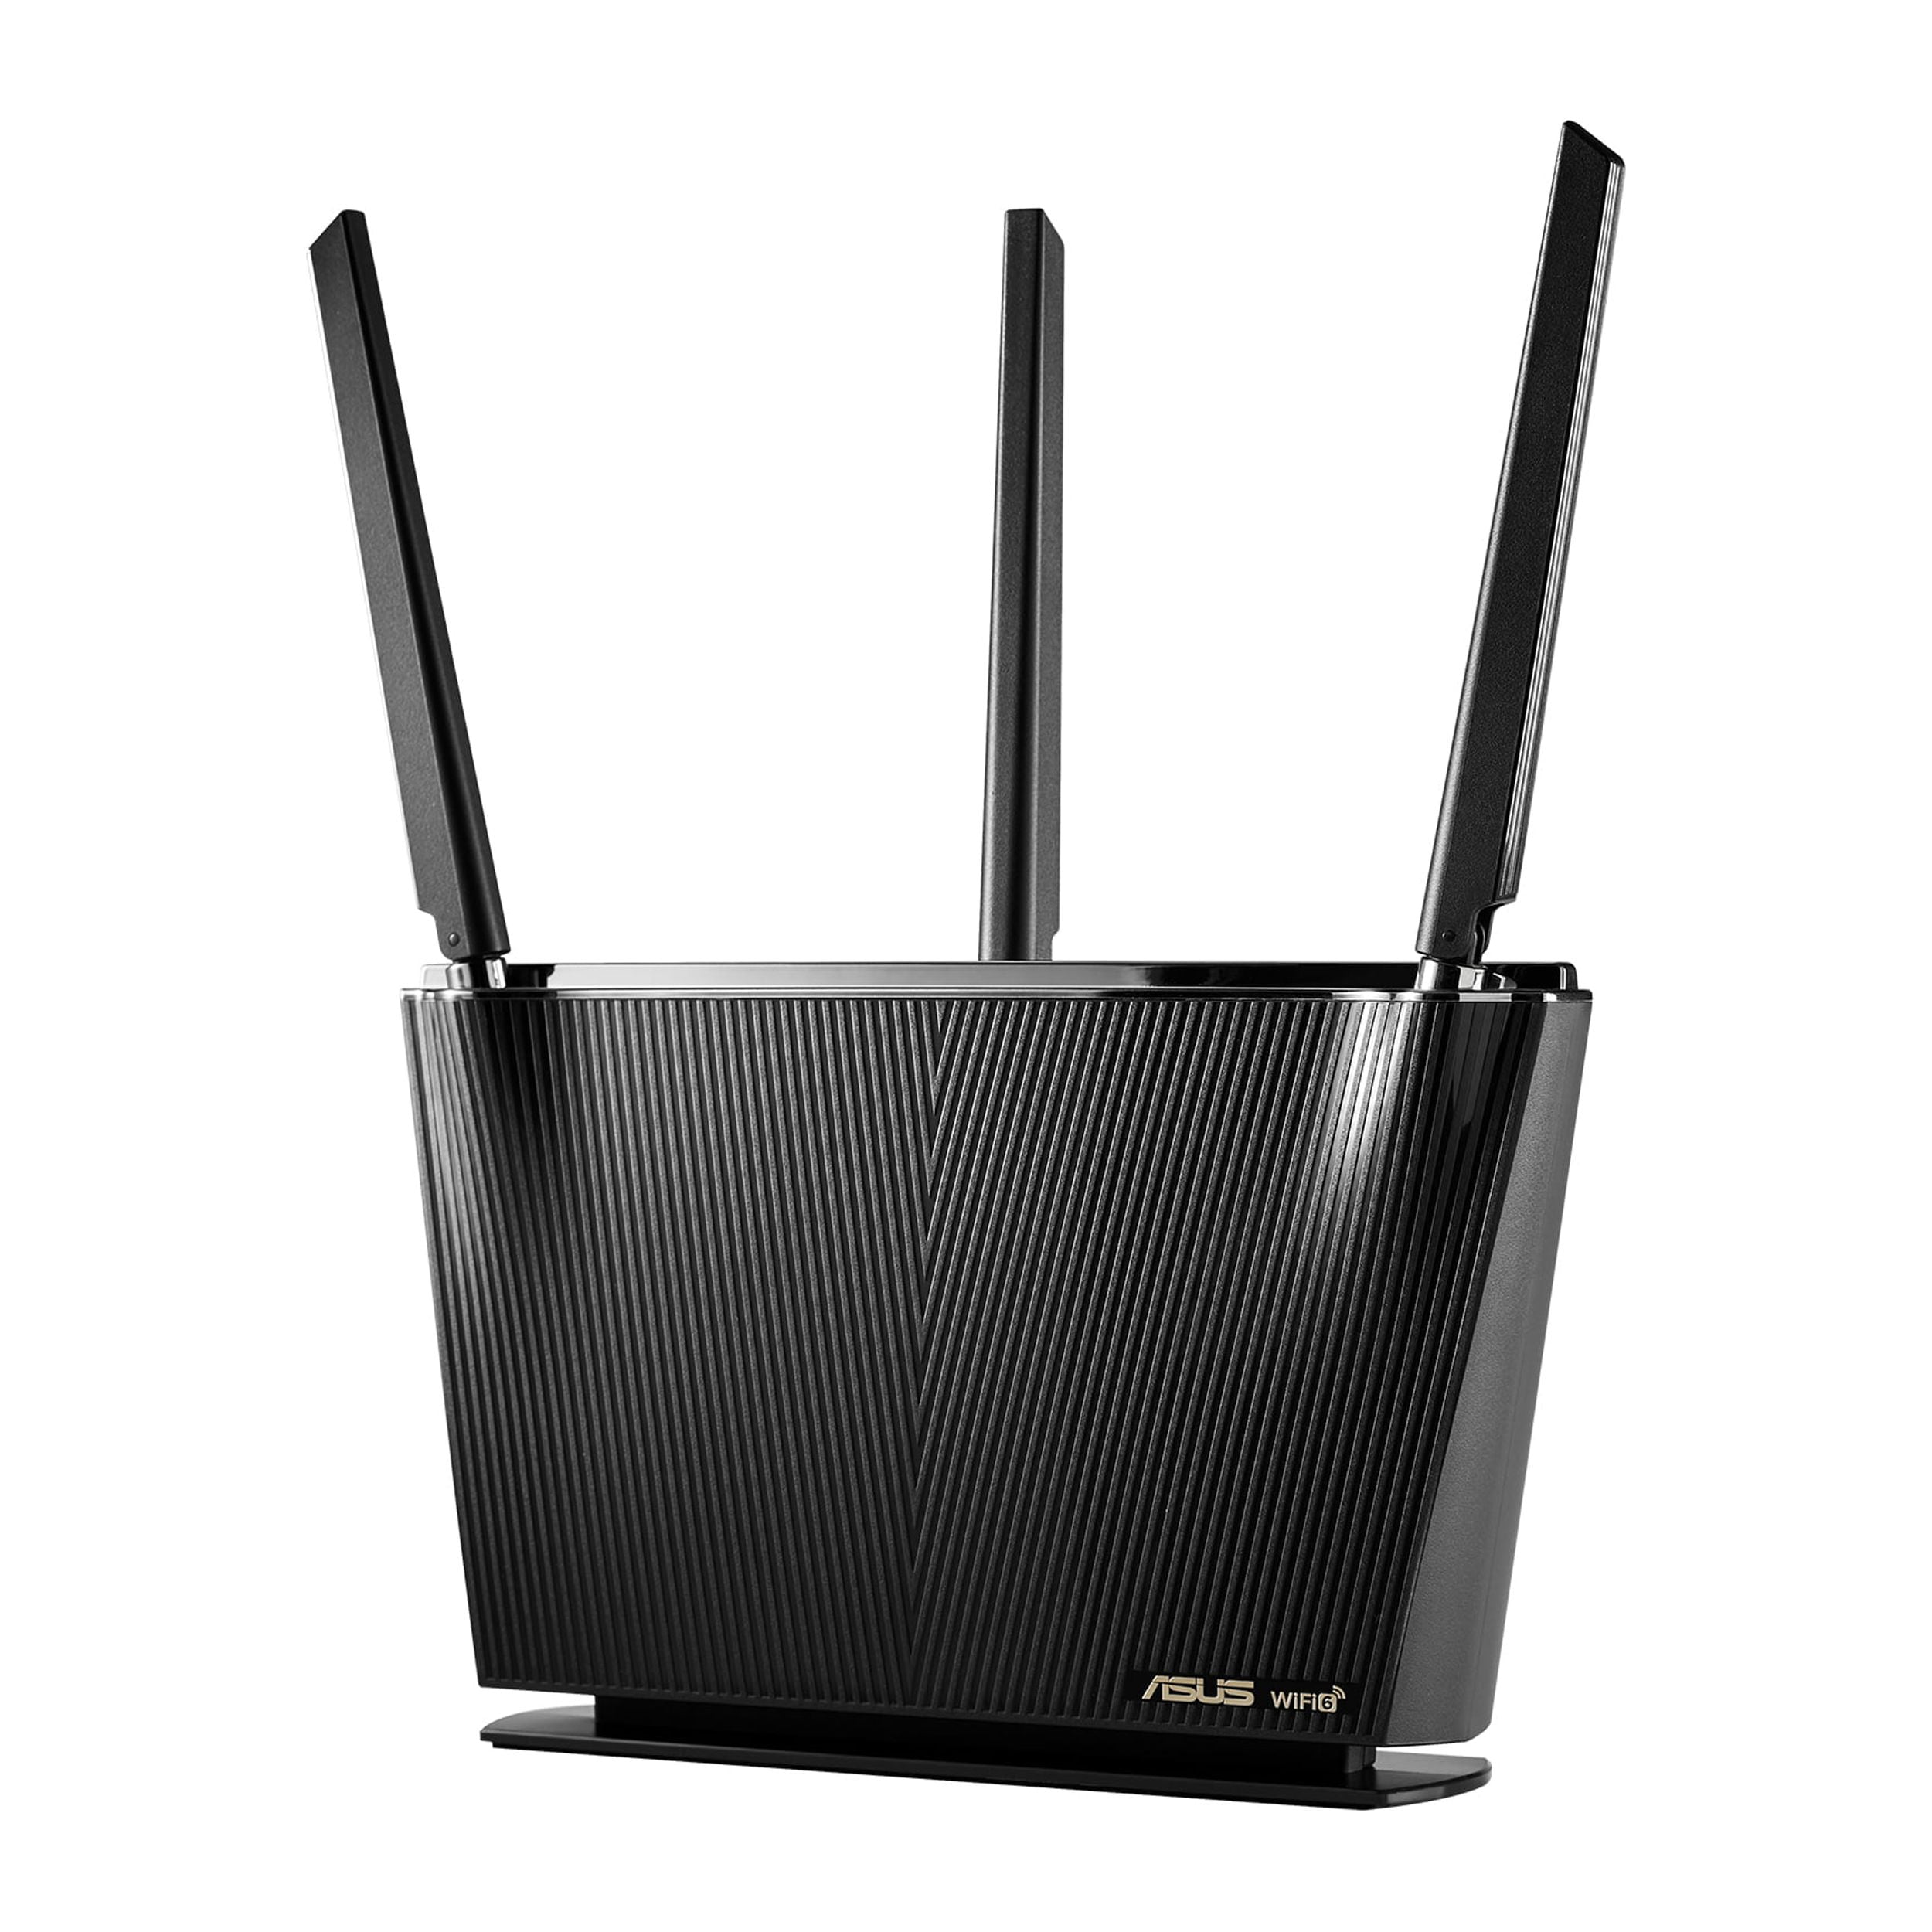 Wi-Fi 7 routers offer 80% higher capacity compared to Wi-Fi 6 by